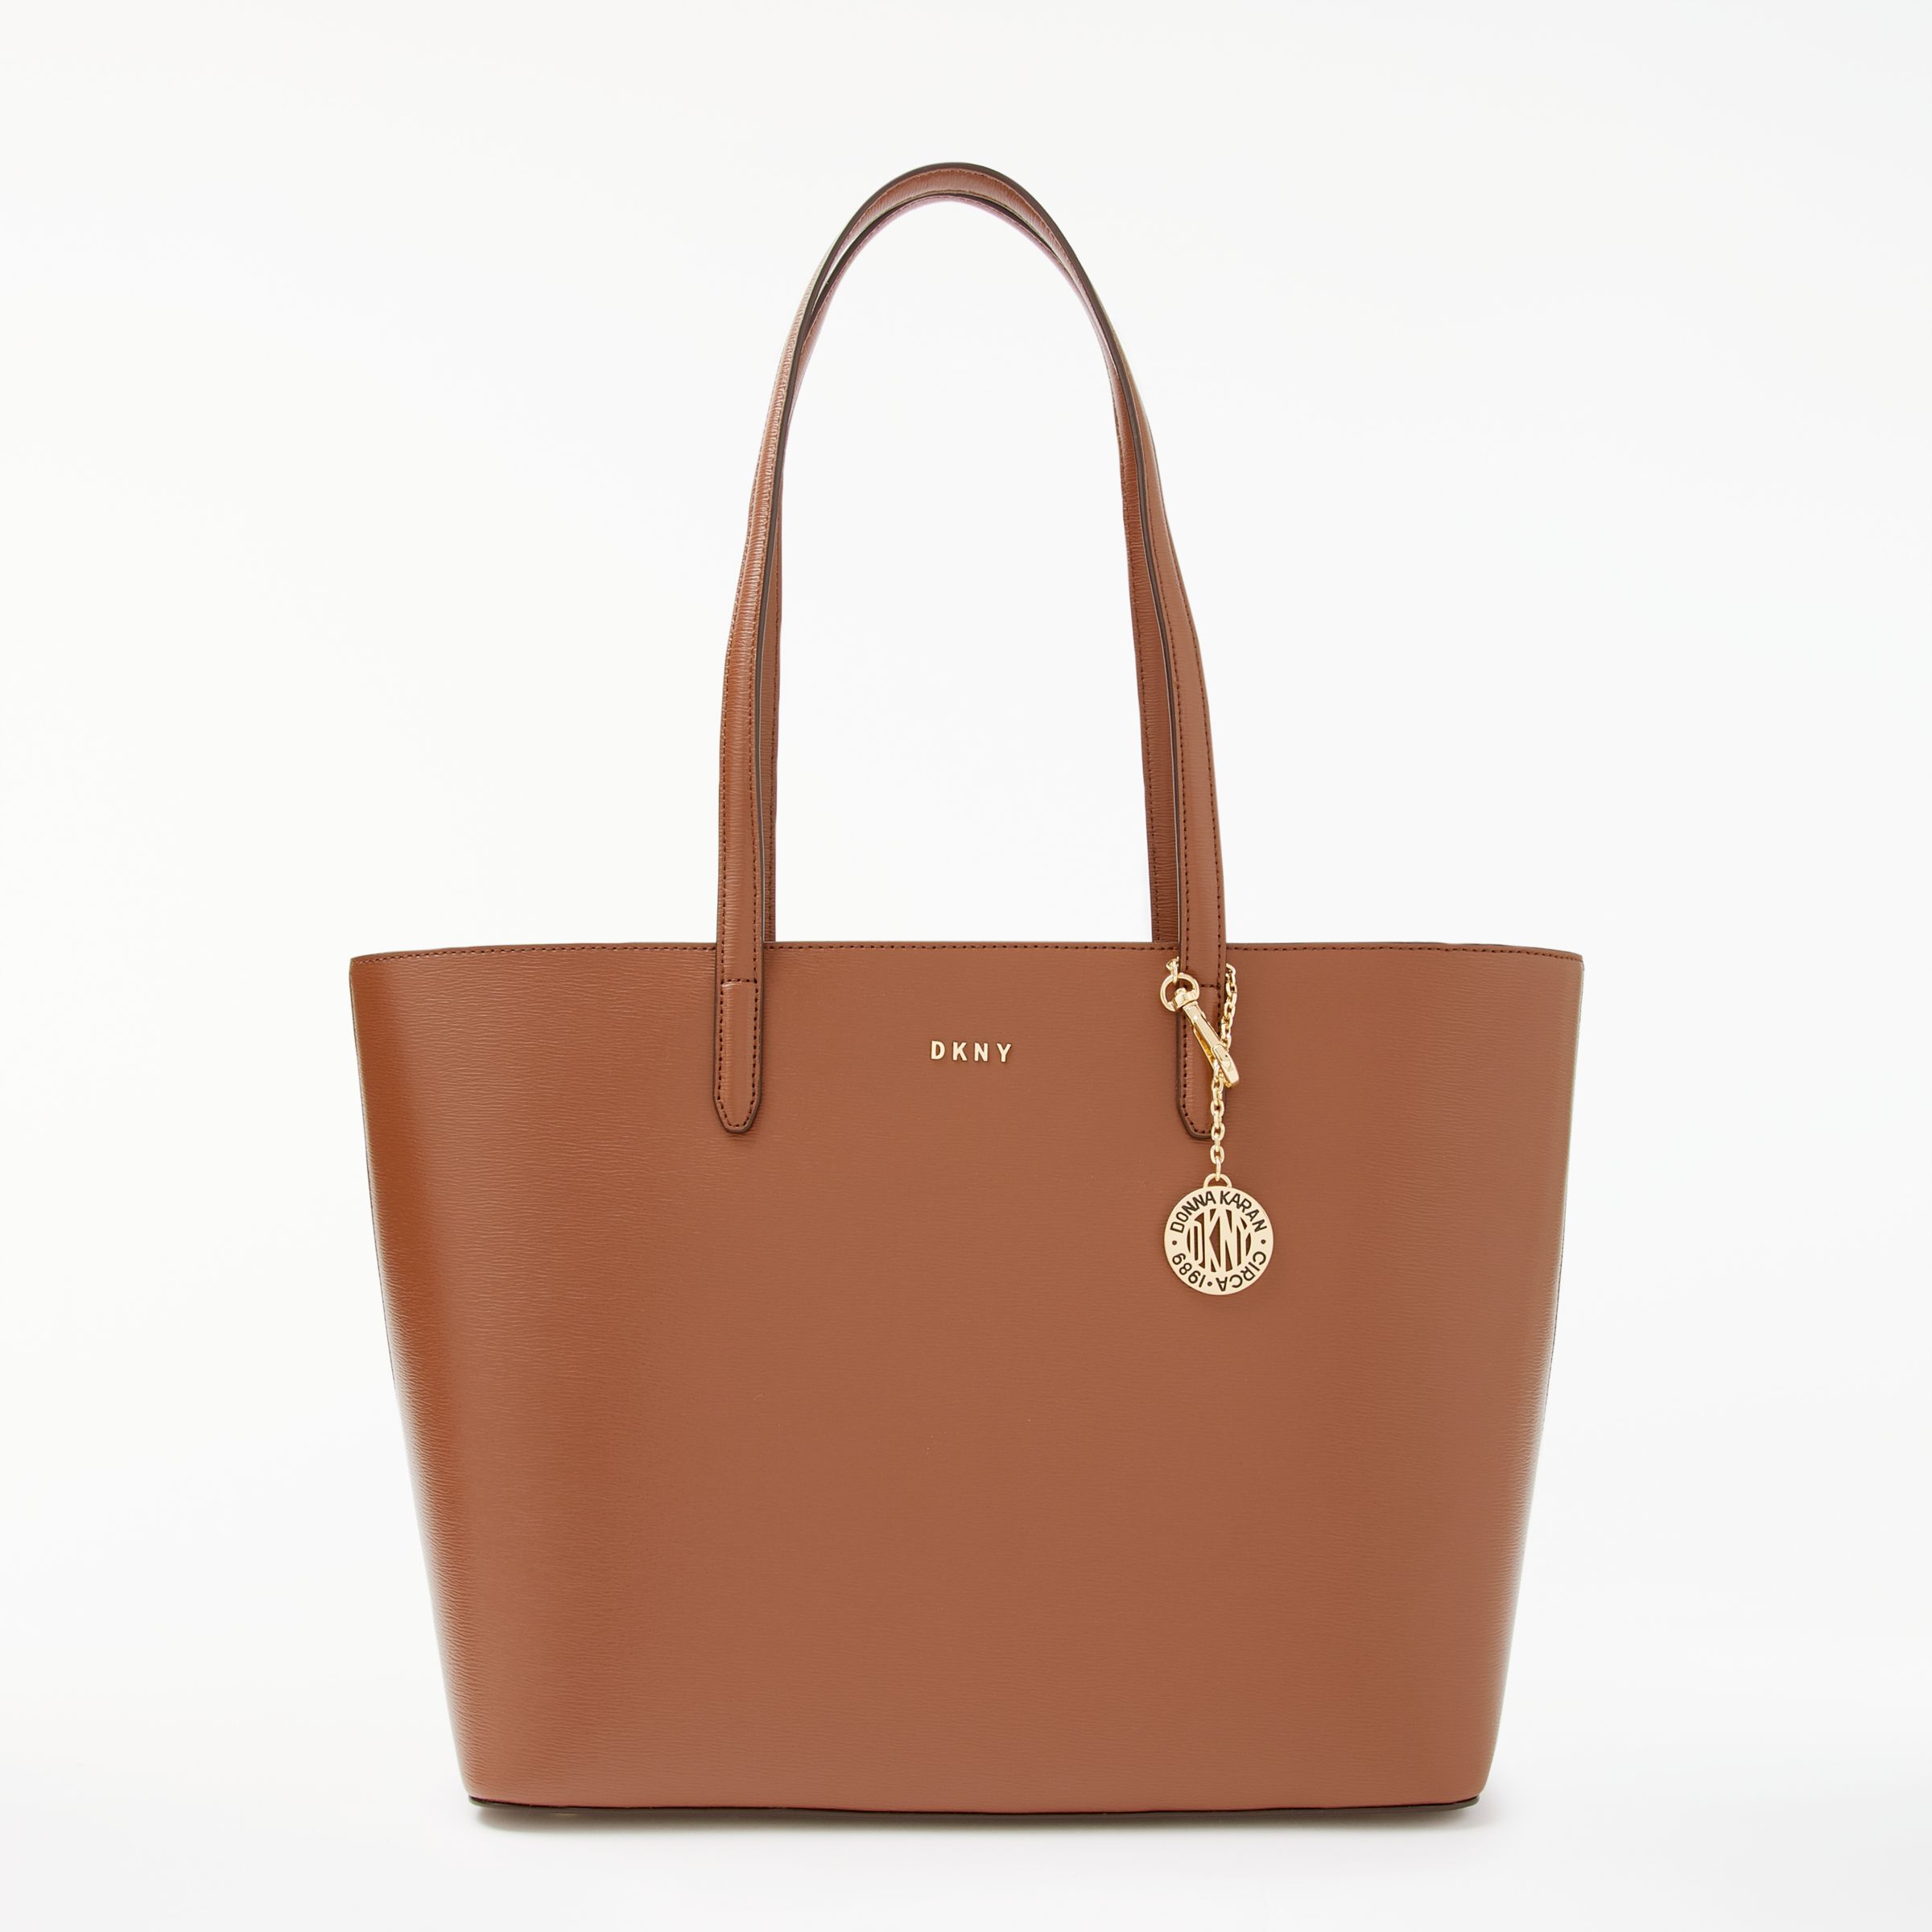 DKNY Sutton Leather Large Tote Bag